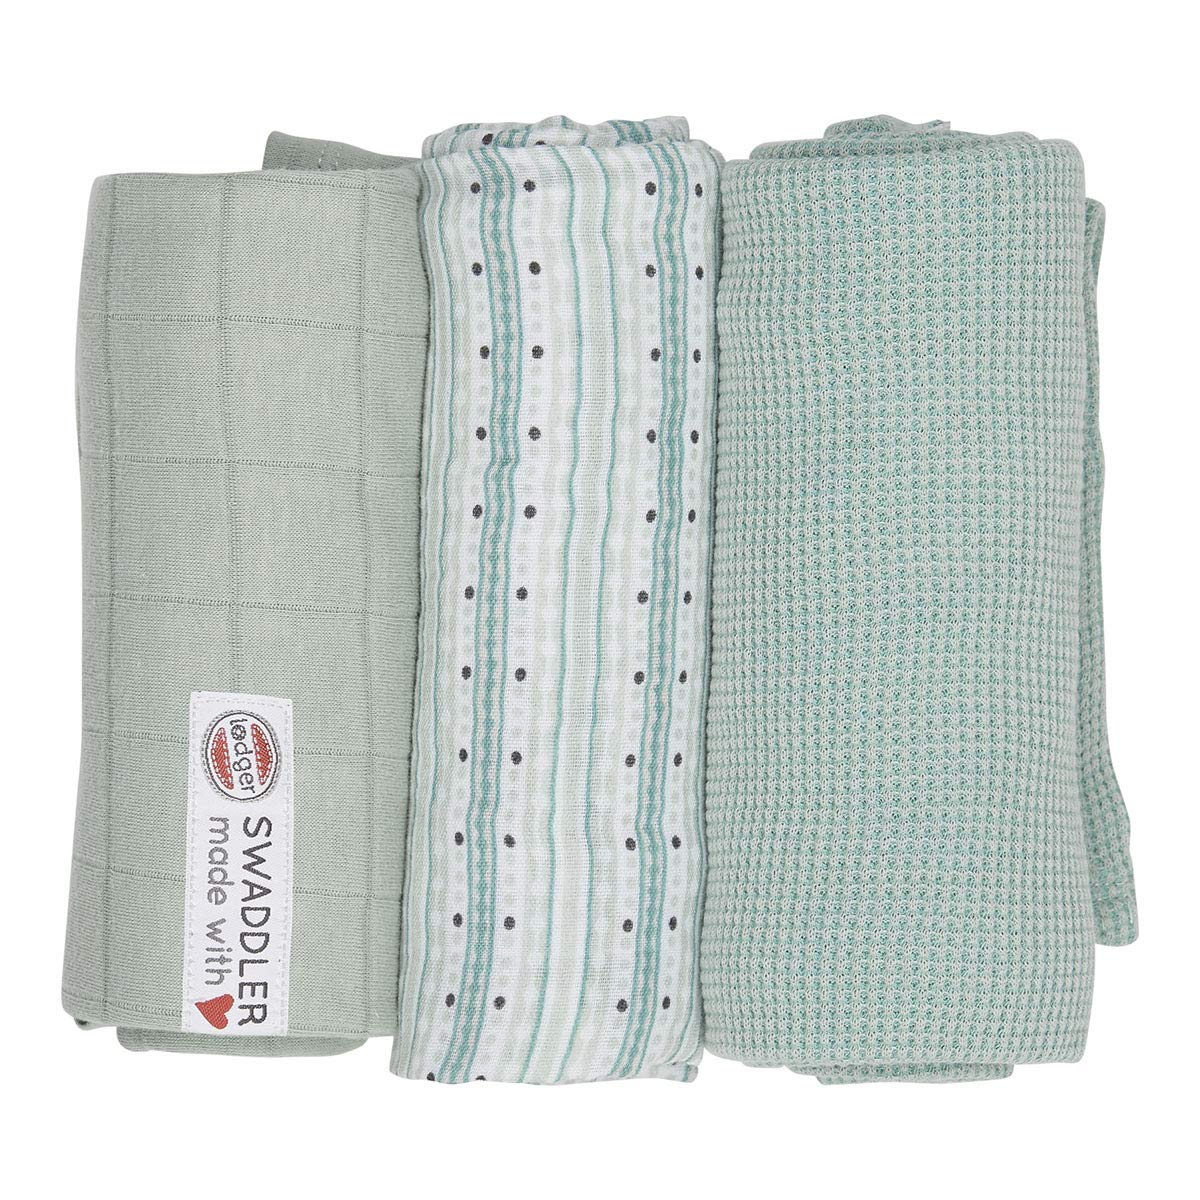 Lodger SW19.2.06.006 081 70 Muslin Nappies Swaddler Empire Pack of 3 70 x 70 cm Green